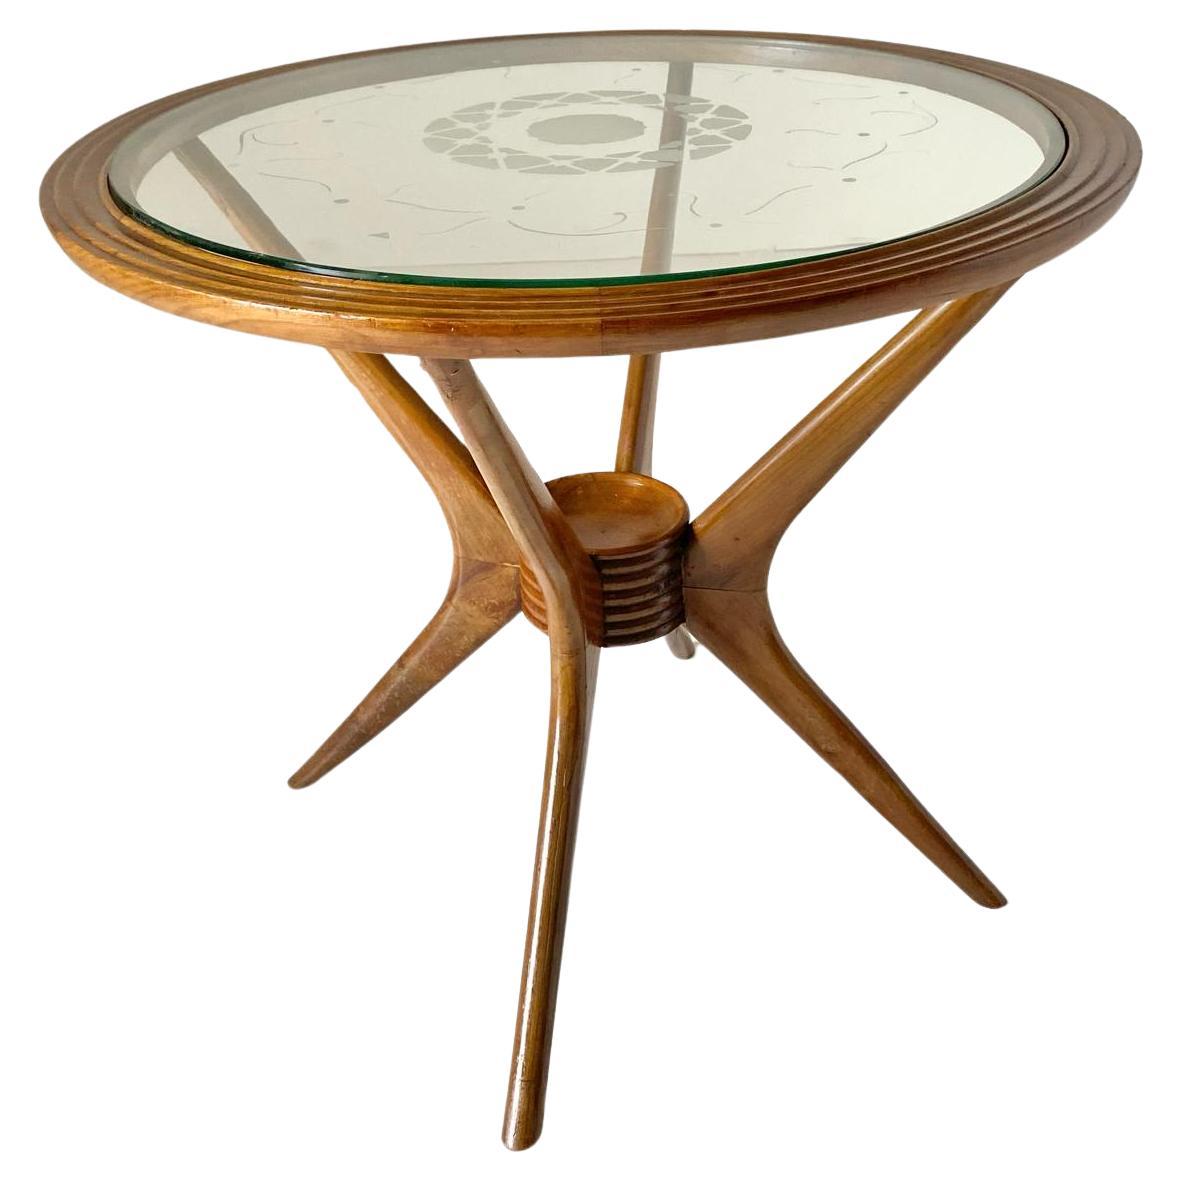 Spider Legs Round Wood Coffee Table, Paolo Buffa for Brugnoli, Italy 1950's For Sale